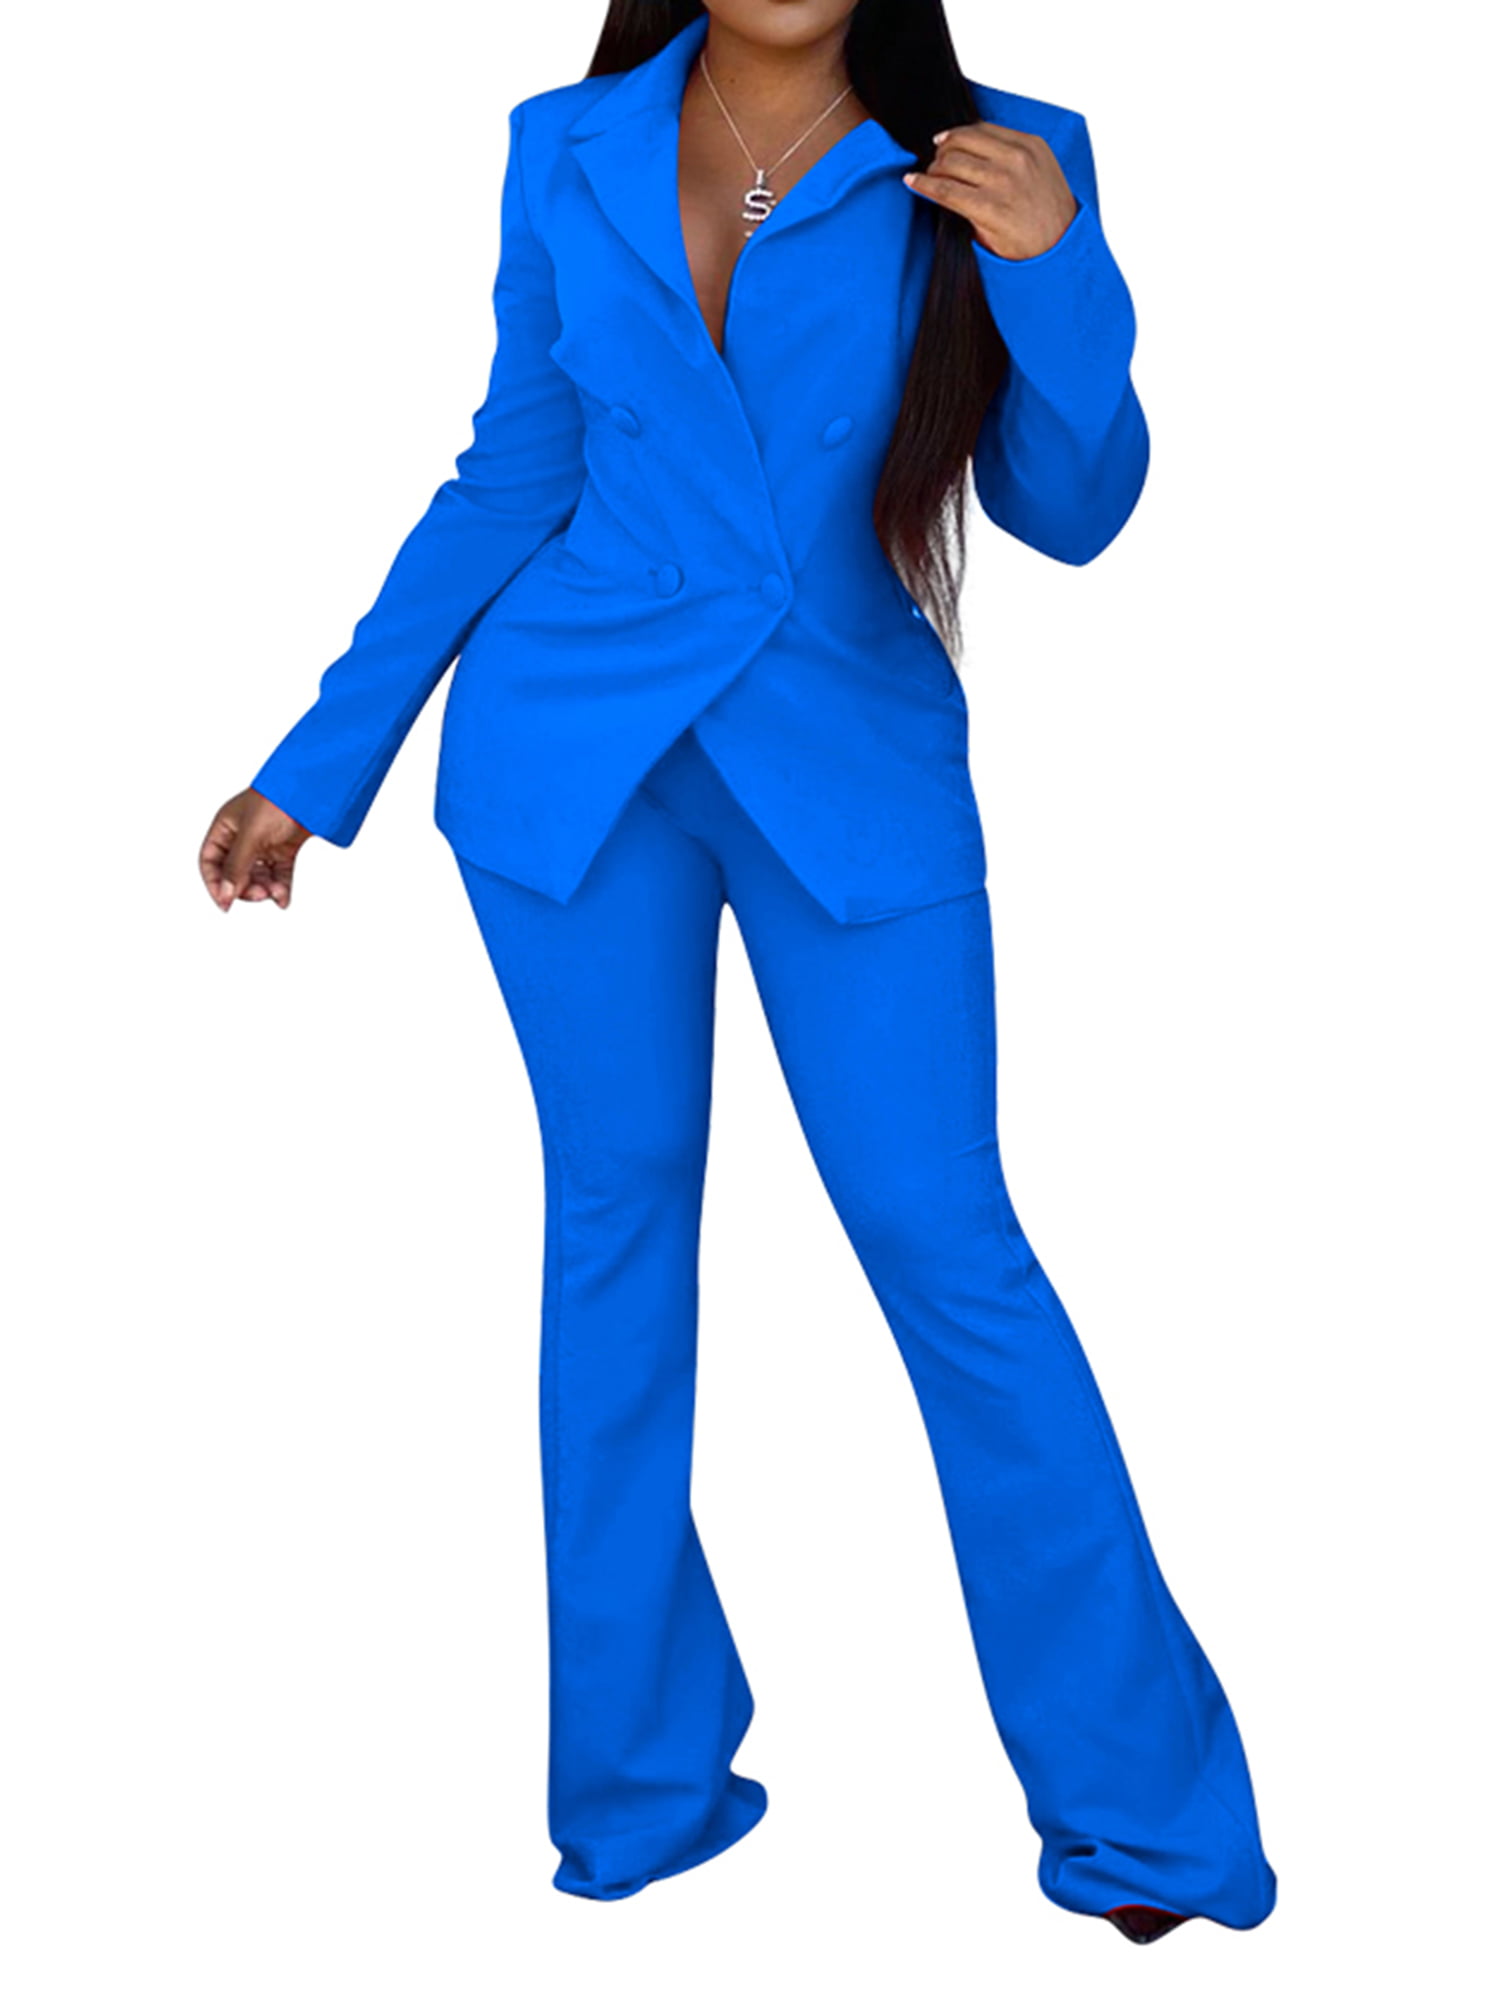 2 Piece Outfits for Women Long Sleeve Solid Color Blazer with Pants Casual Elegant Business Suit Sets 